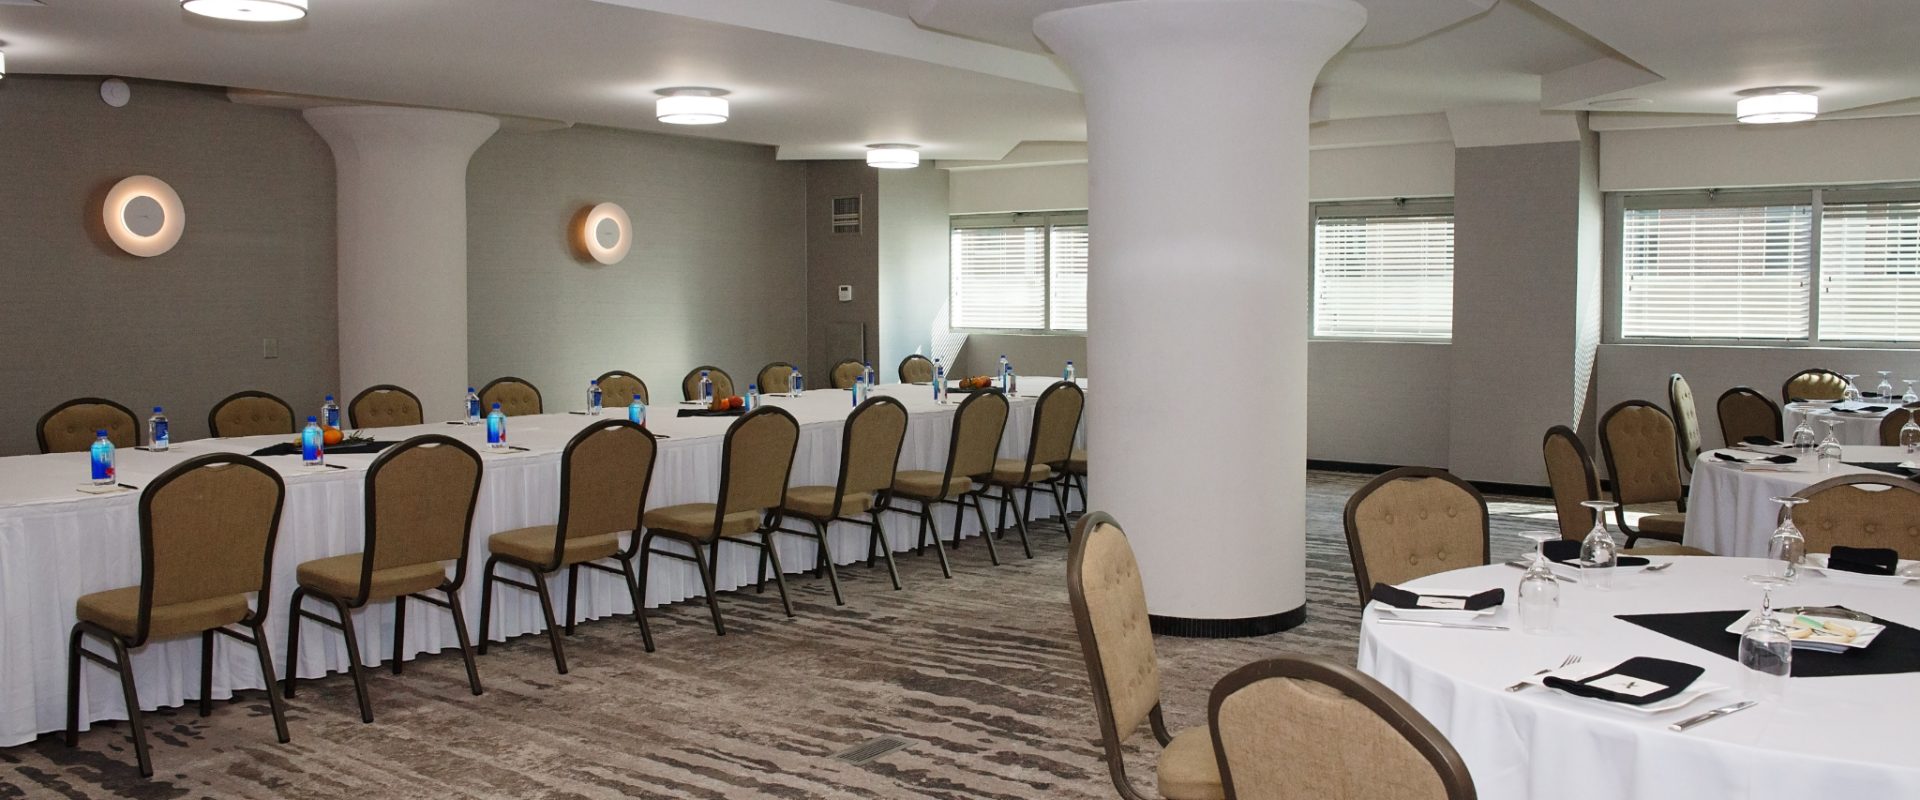 The Atheneum event space